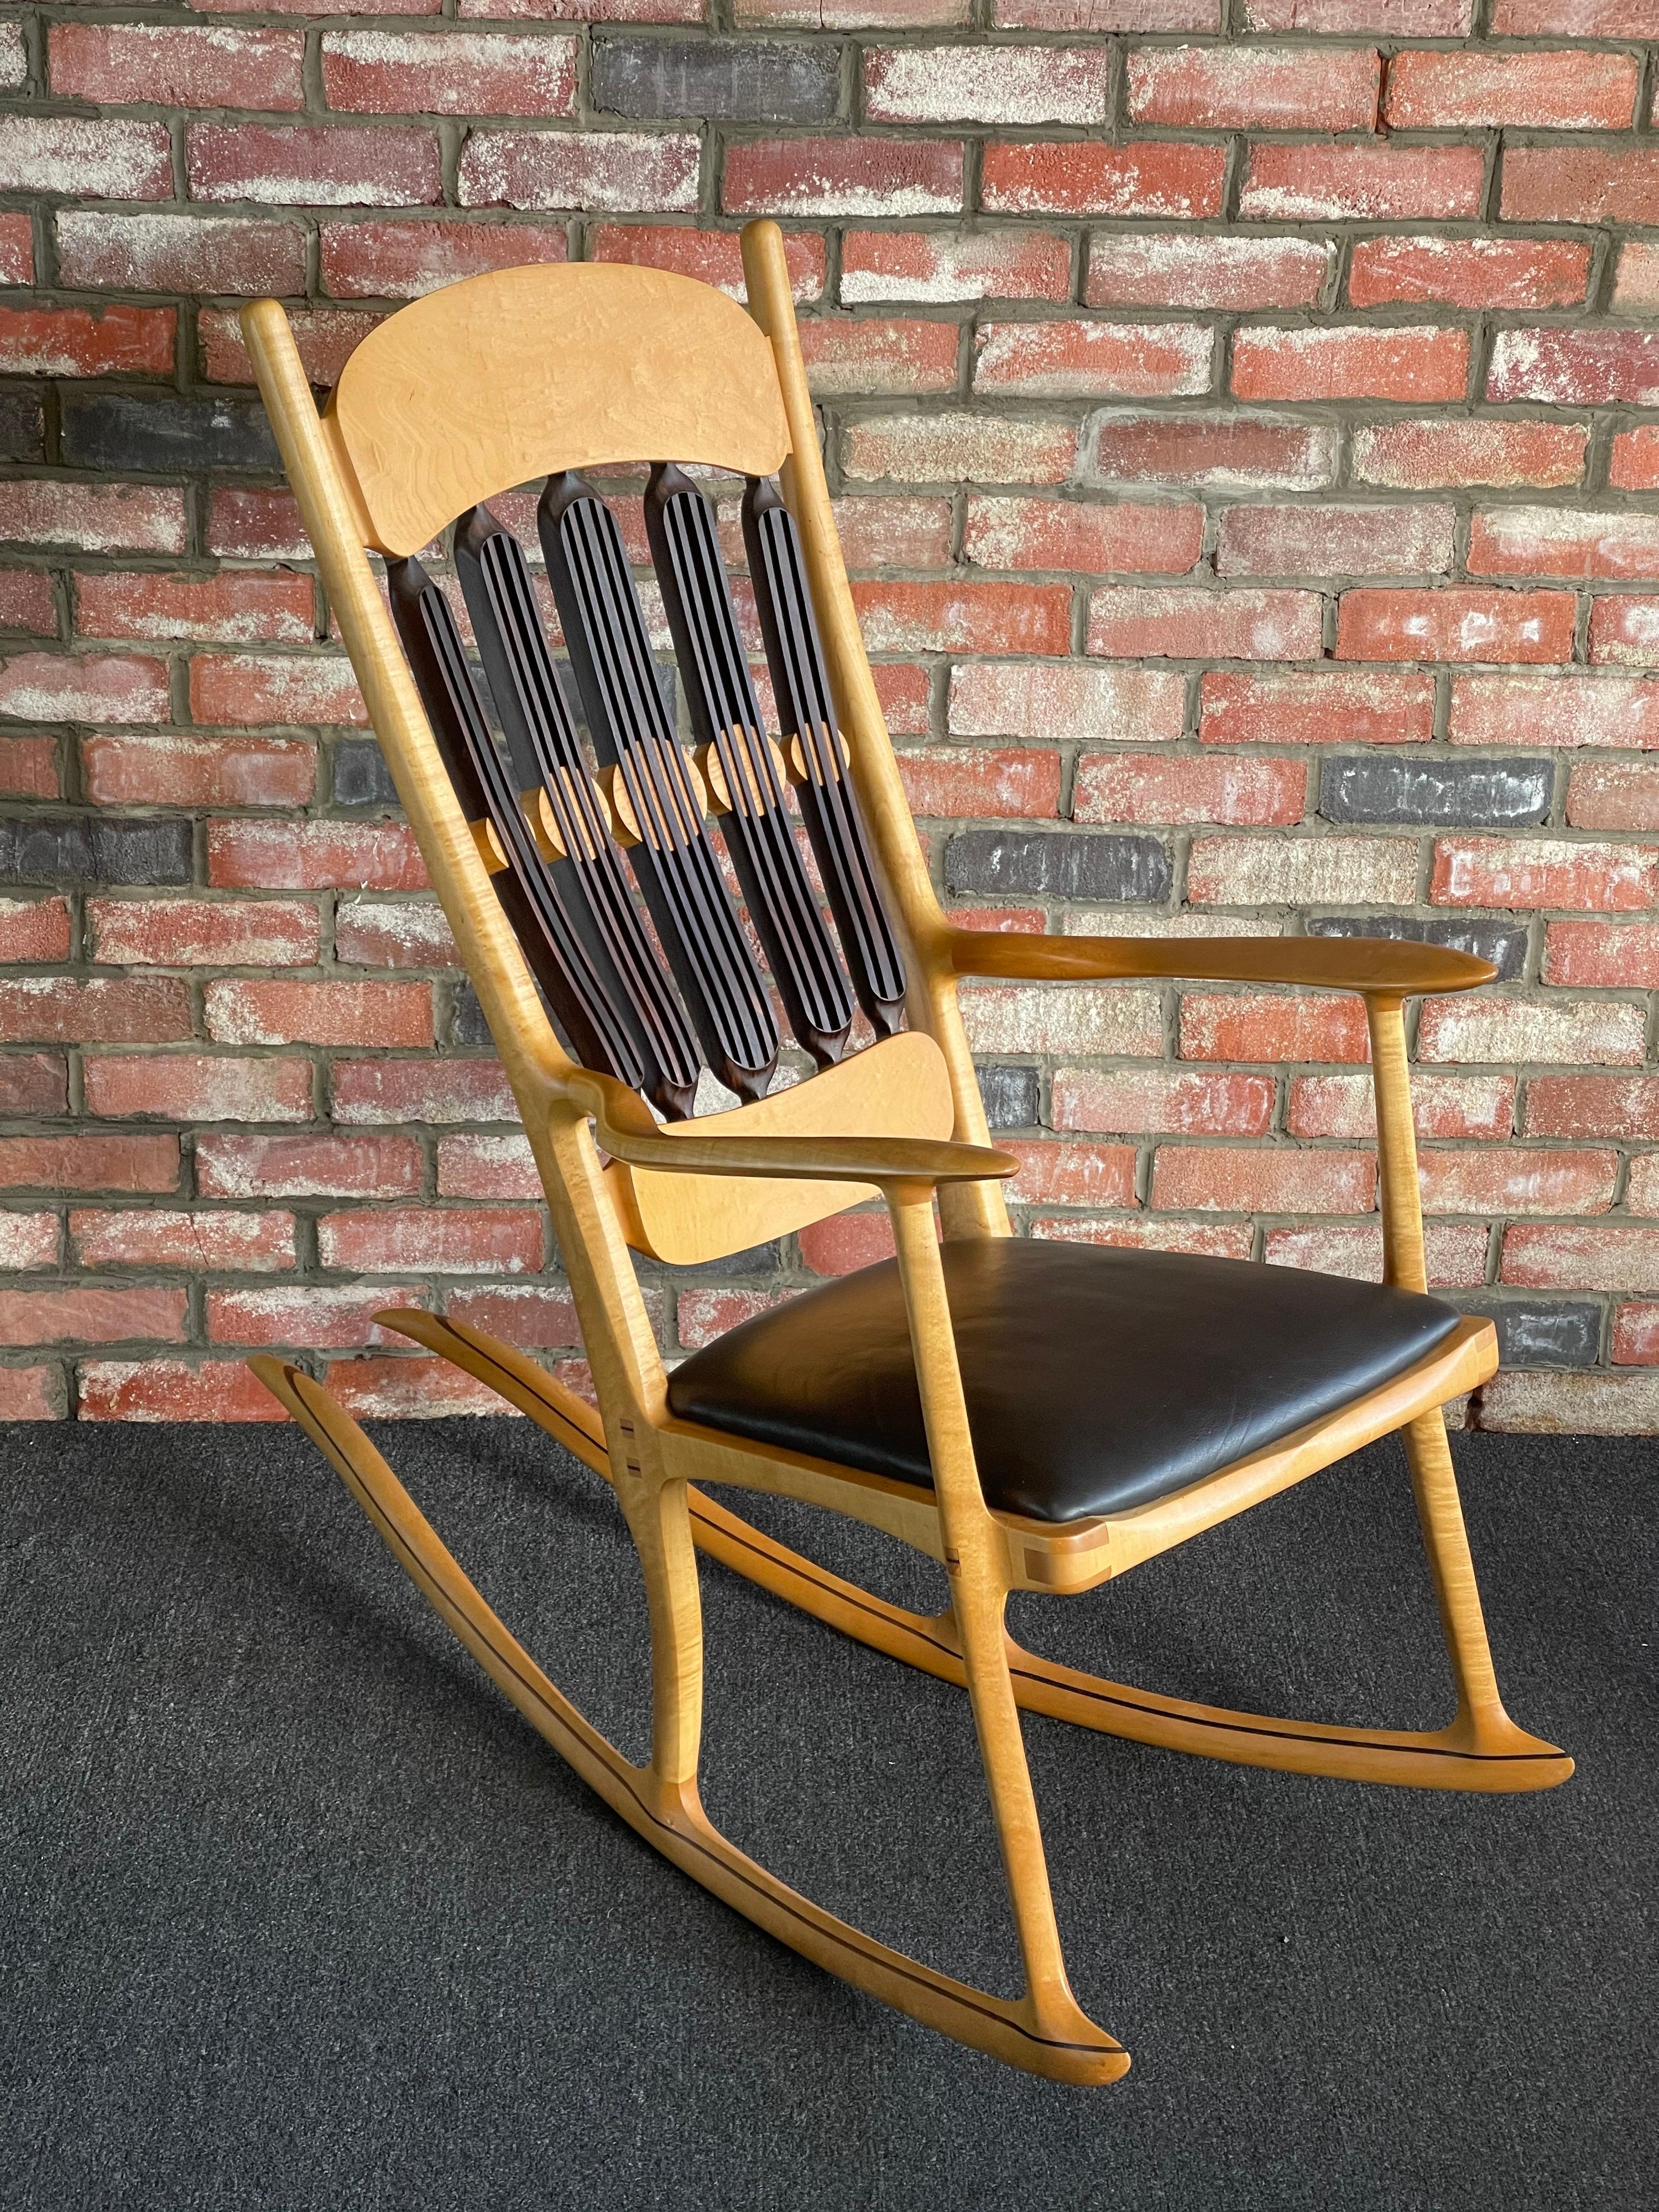 Organic Modern  Handcrafted Artisan Studio Rocking Chair by Jeffry Mann 1987 For Sale